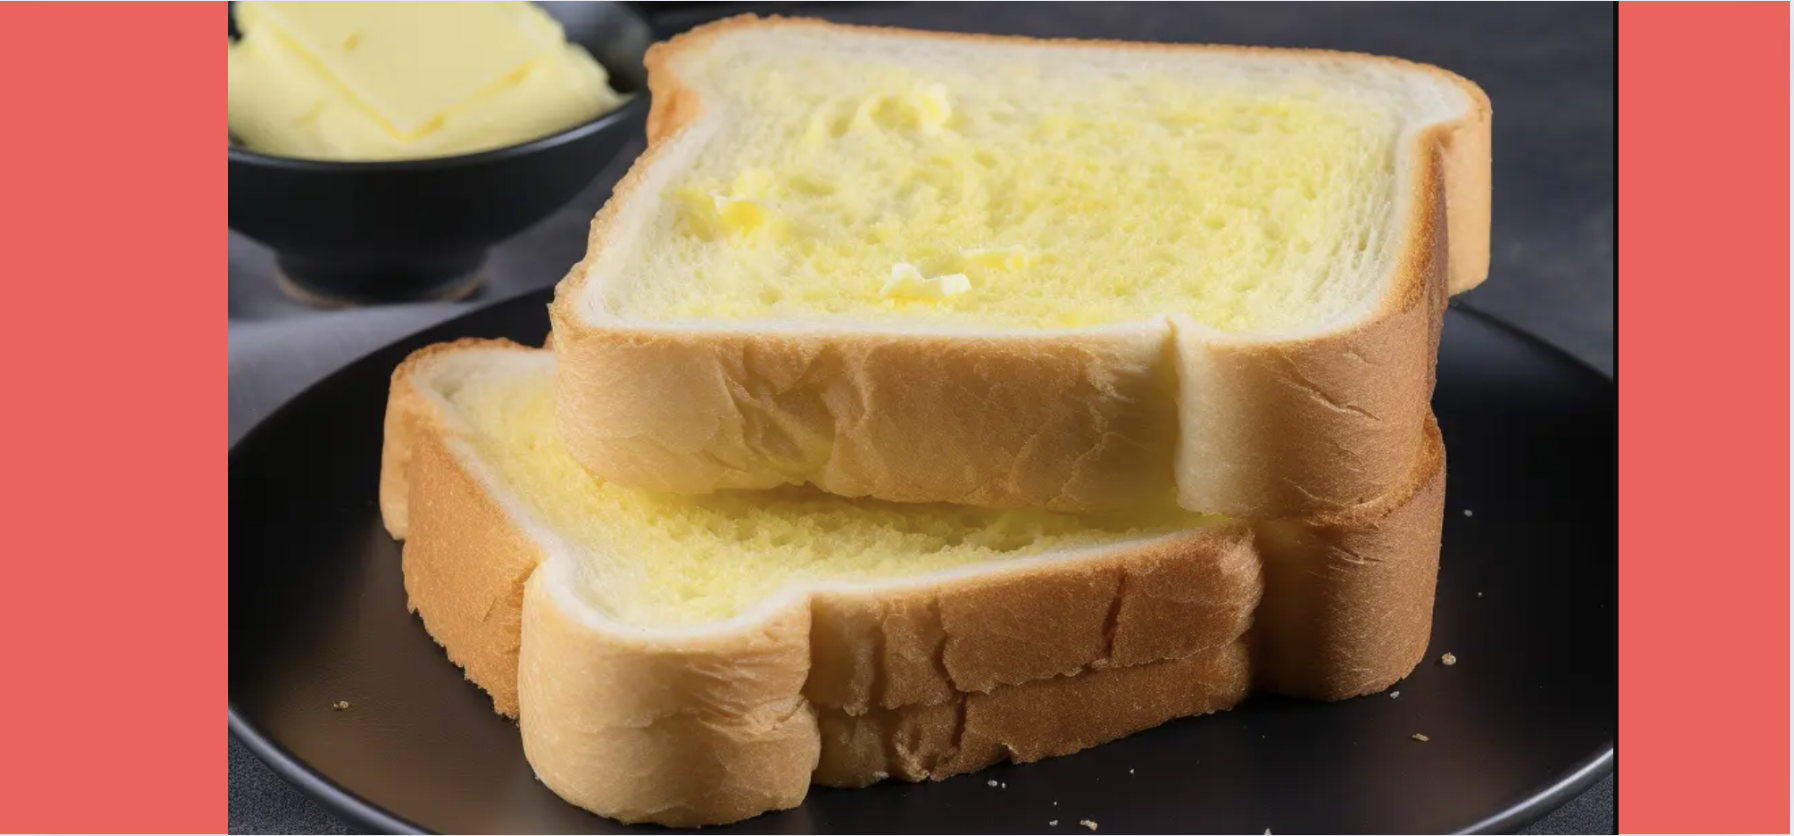 Bread, Butter, Cooking Oil Are Unhealthy, Classified As Ultra-Processed Food